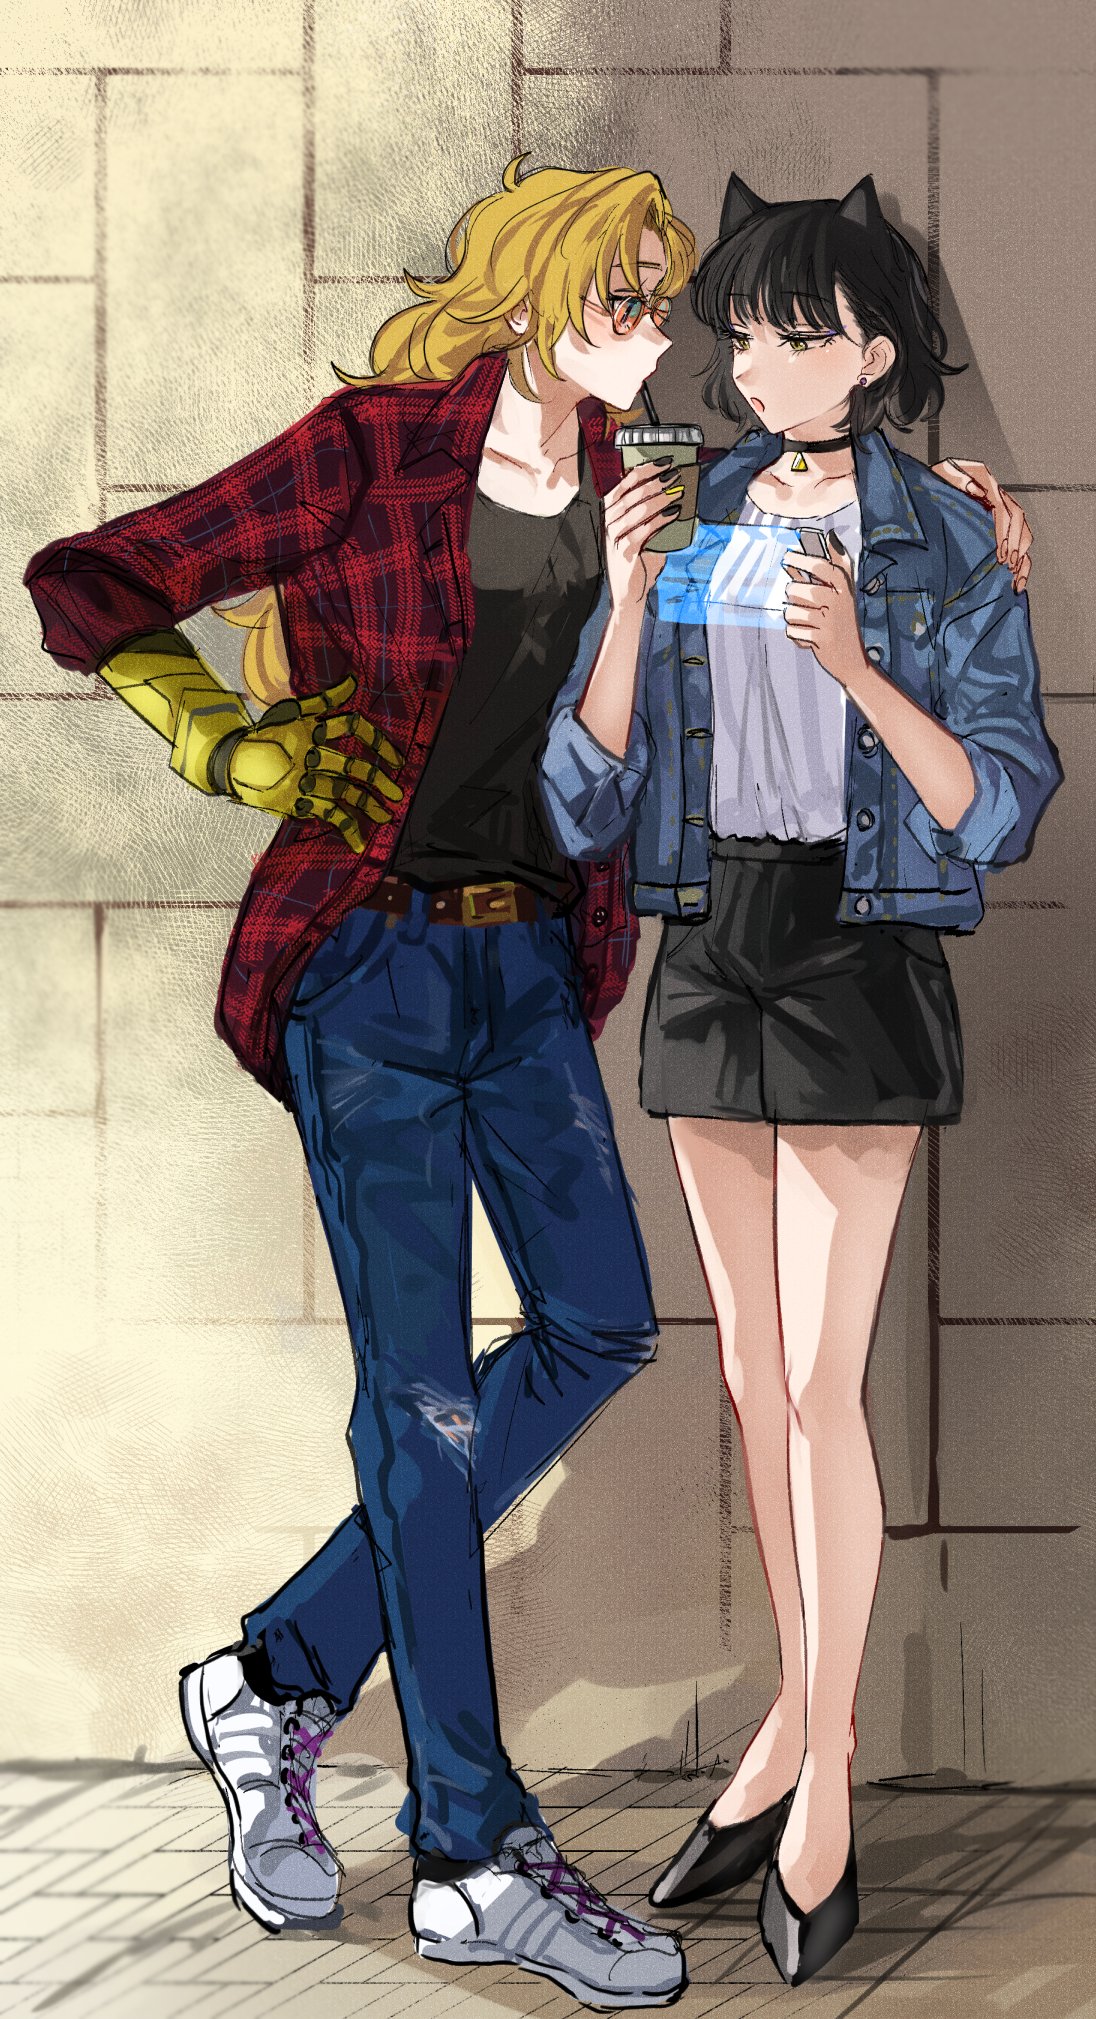 2girls animal_ears arm_around_shoulder bangs bare_legs black_choker black_footwear black_hair black_shirt black_shorts blake_belladonna blonde_hair cat_ears checkered_clothes checkered_shirt choker closed_mouth collarbone commentary_request denim denim_jacket drink drinking_straw_in_mouth earrings glasses highres holding holding_drink holding_phone jacket jeans jewelry long_hair mechanical_arms multiple_girls naizo_(kimosugimasu) outdoors pants phone profile red_shirt rwby shared_drink shirt shirt_tucked_in shoes short_hair shorts sneakers standing stud_earrings white_footwear white_shirt yang_xiao_long yuri